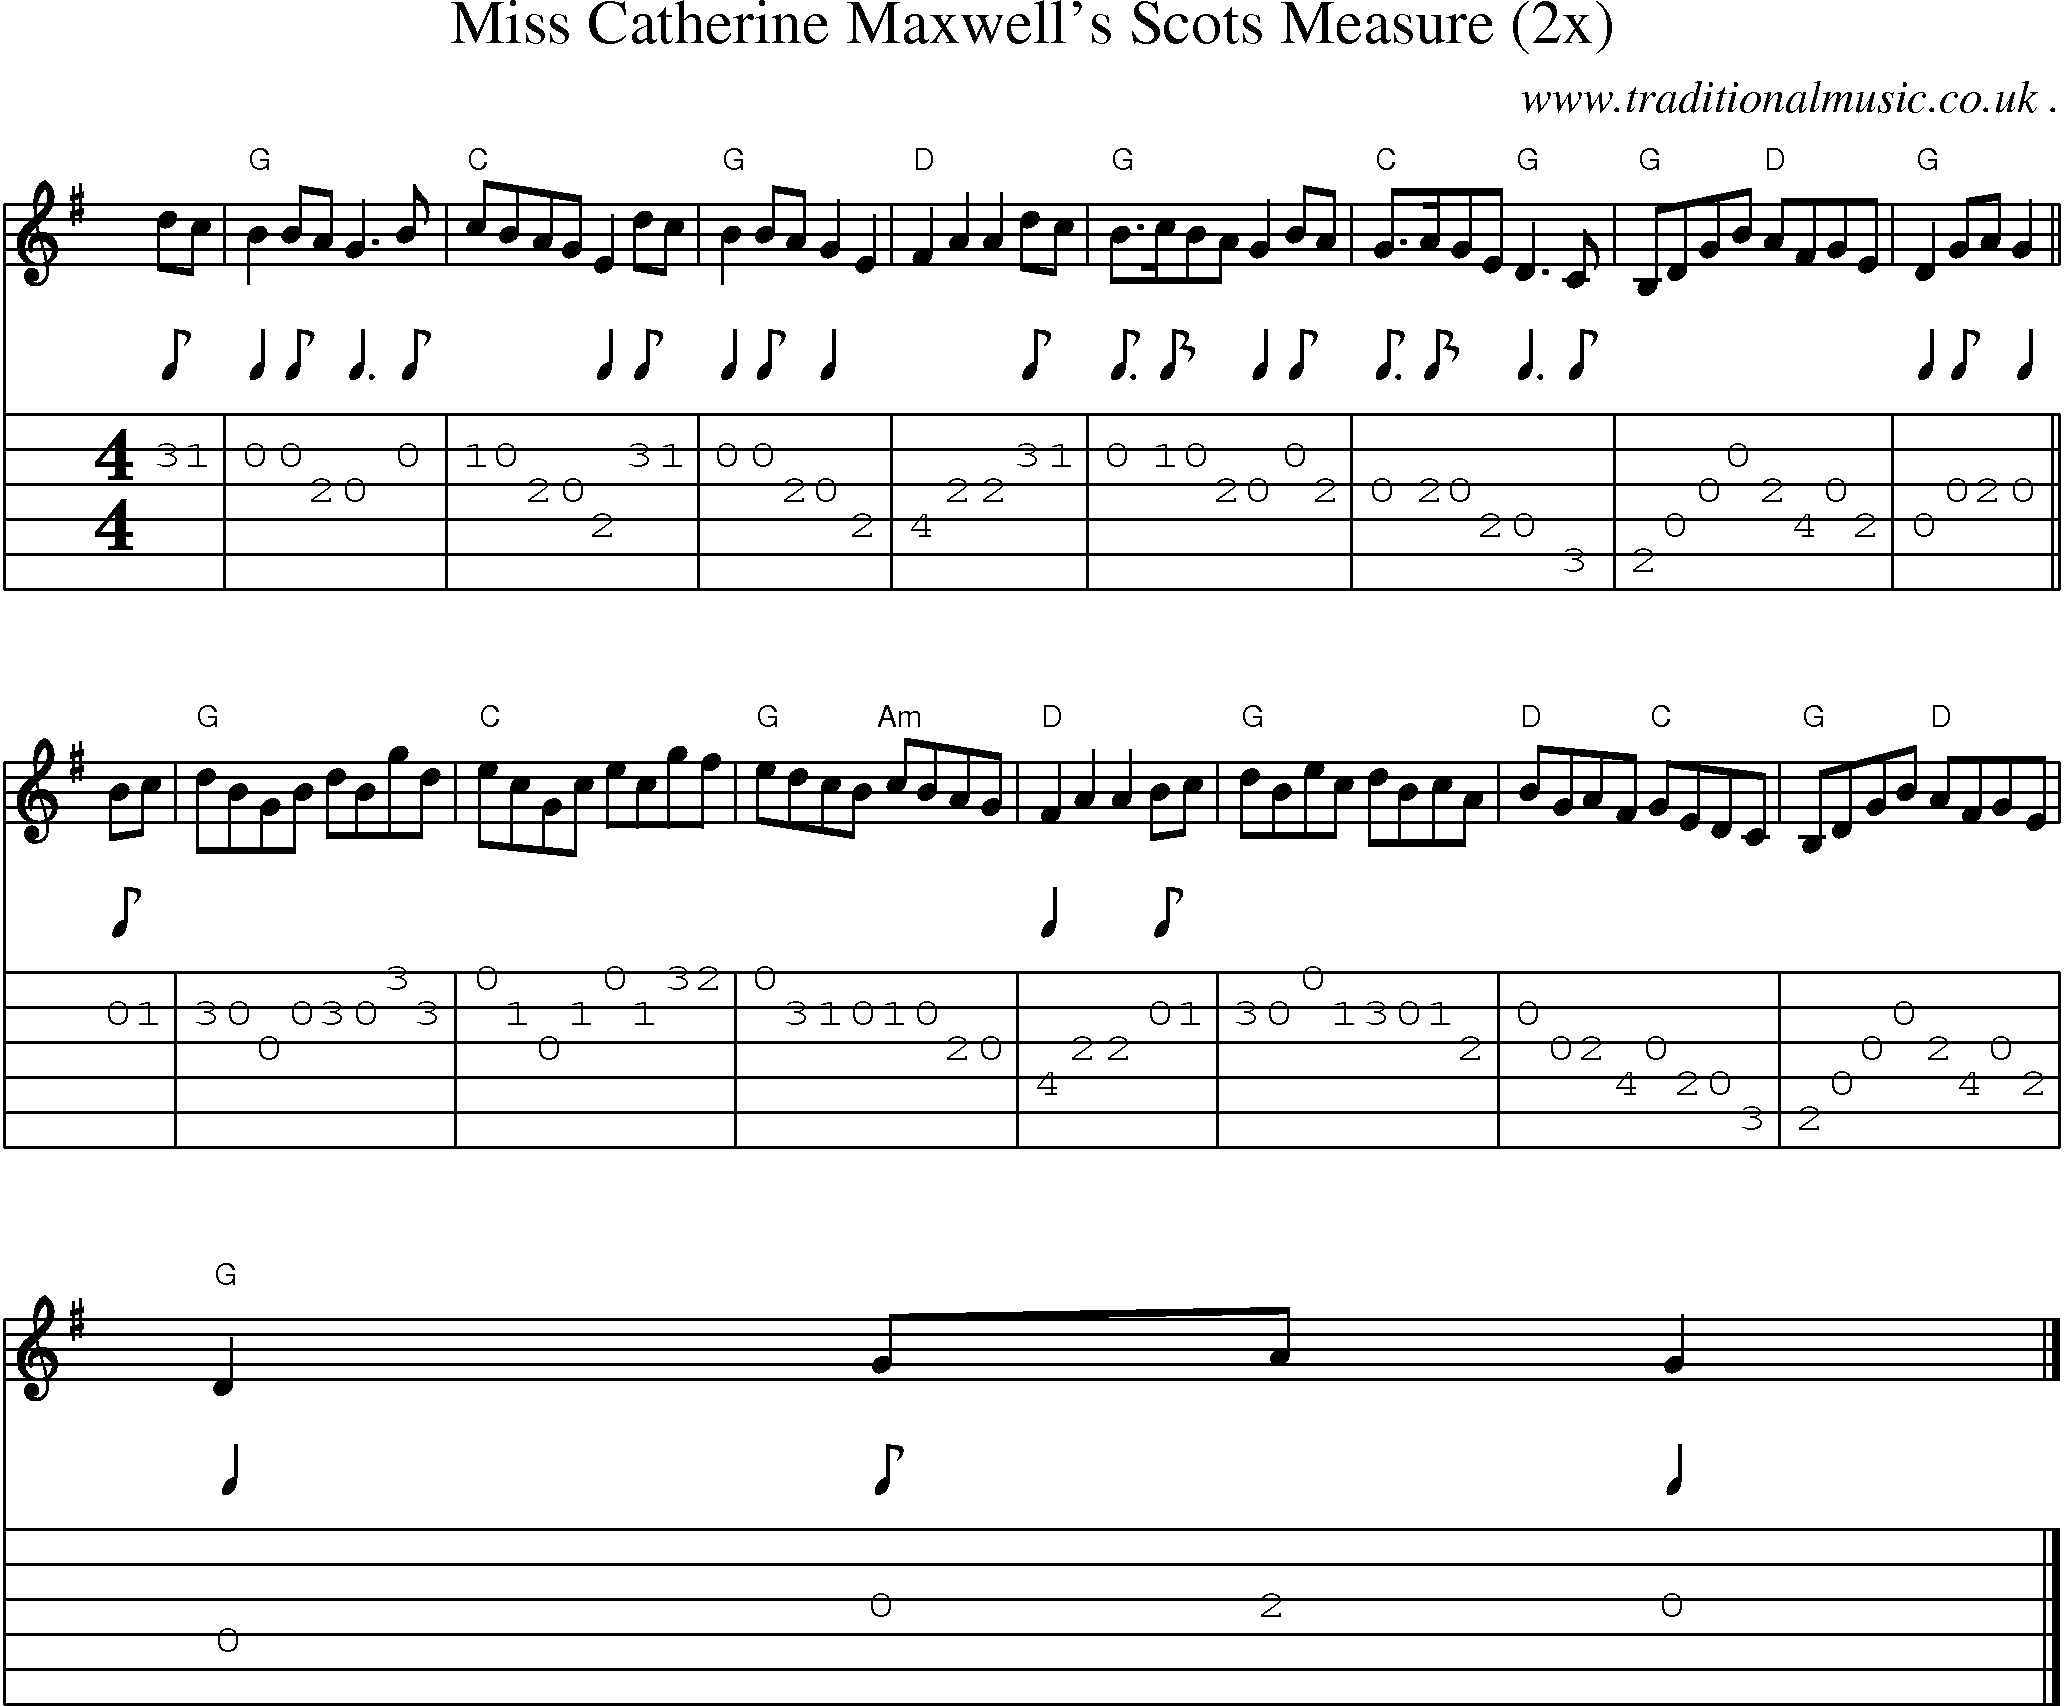 Sheet-music  score, Chords and Guitar Tabs for Miss Catherine Maxwells Scots Measure 2x